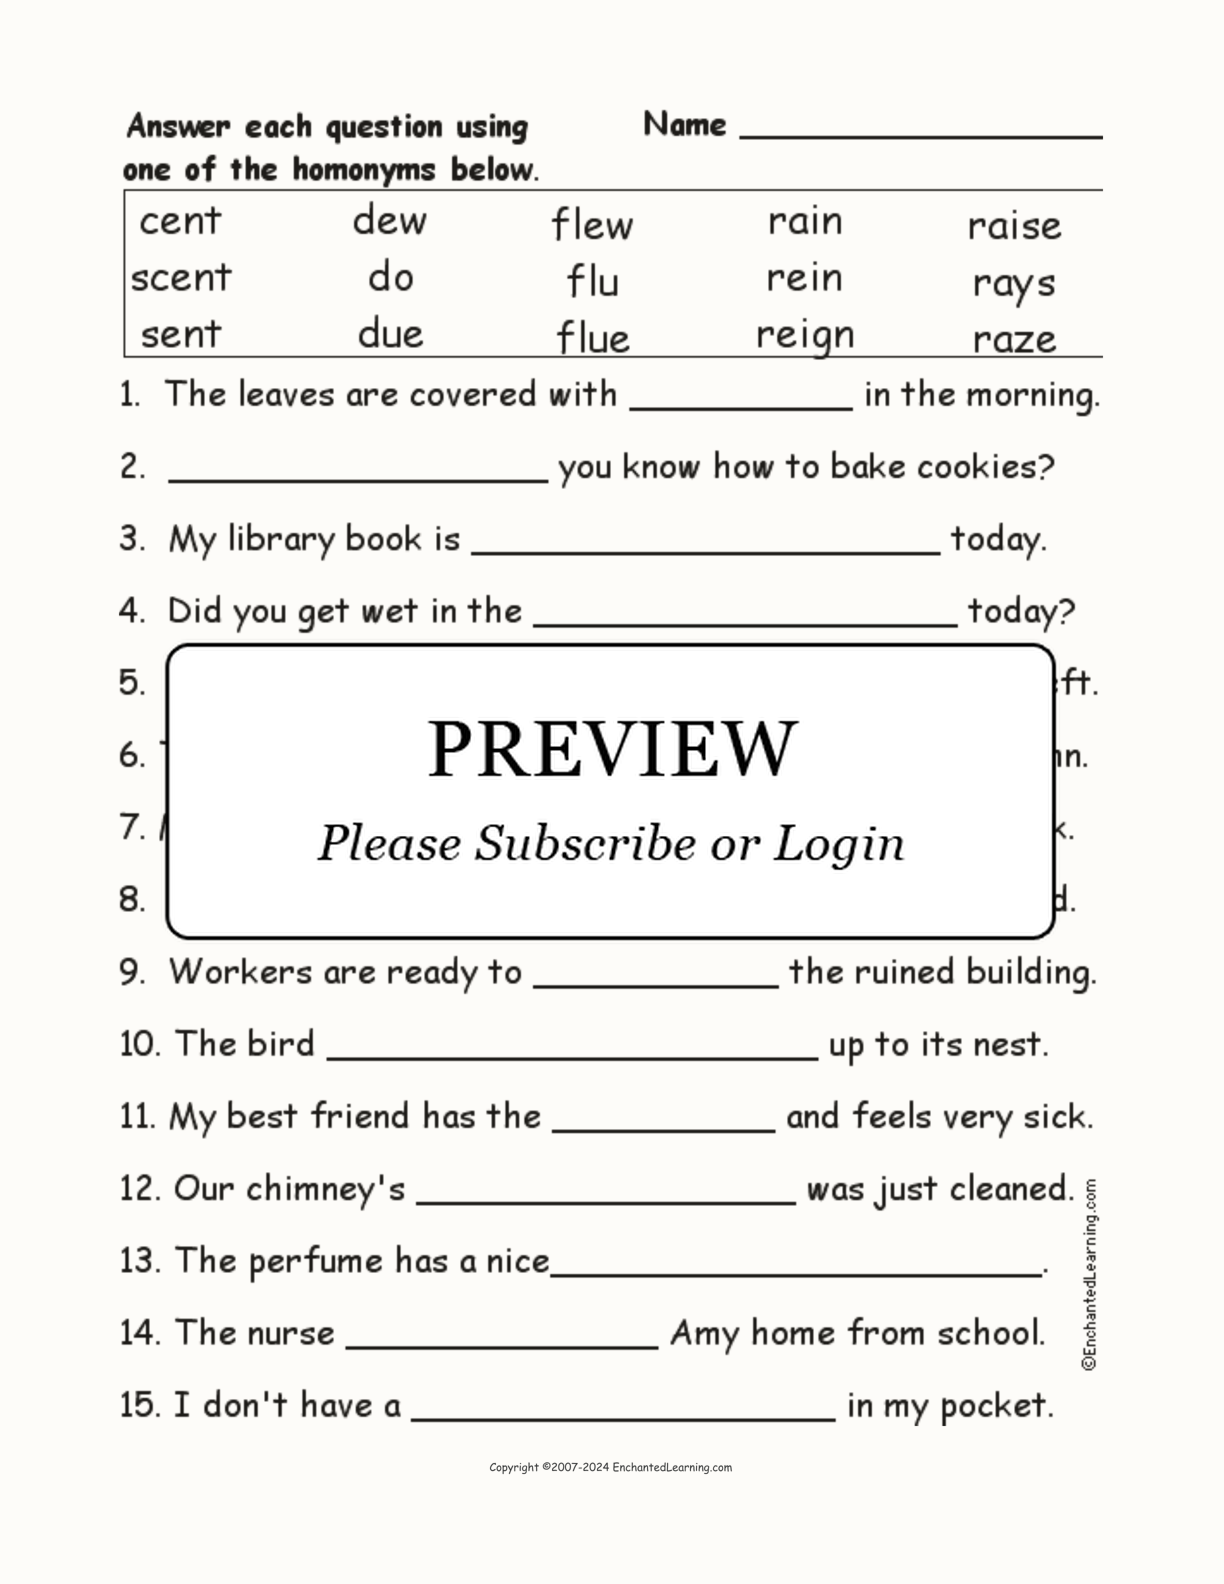 Homonyms Spelling Word Questions #2 interactive worksheet page 1